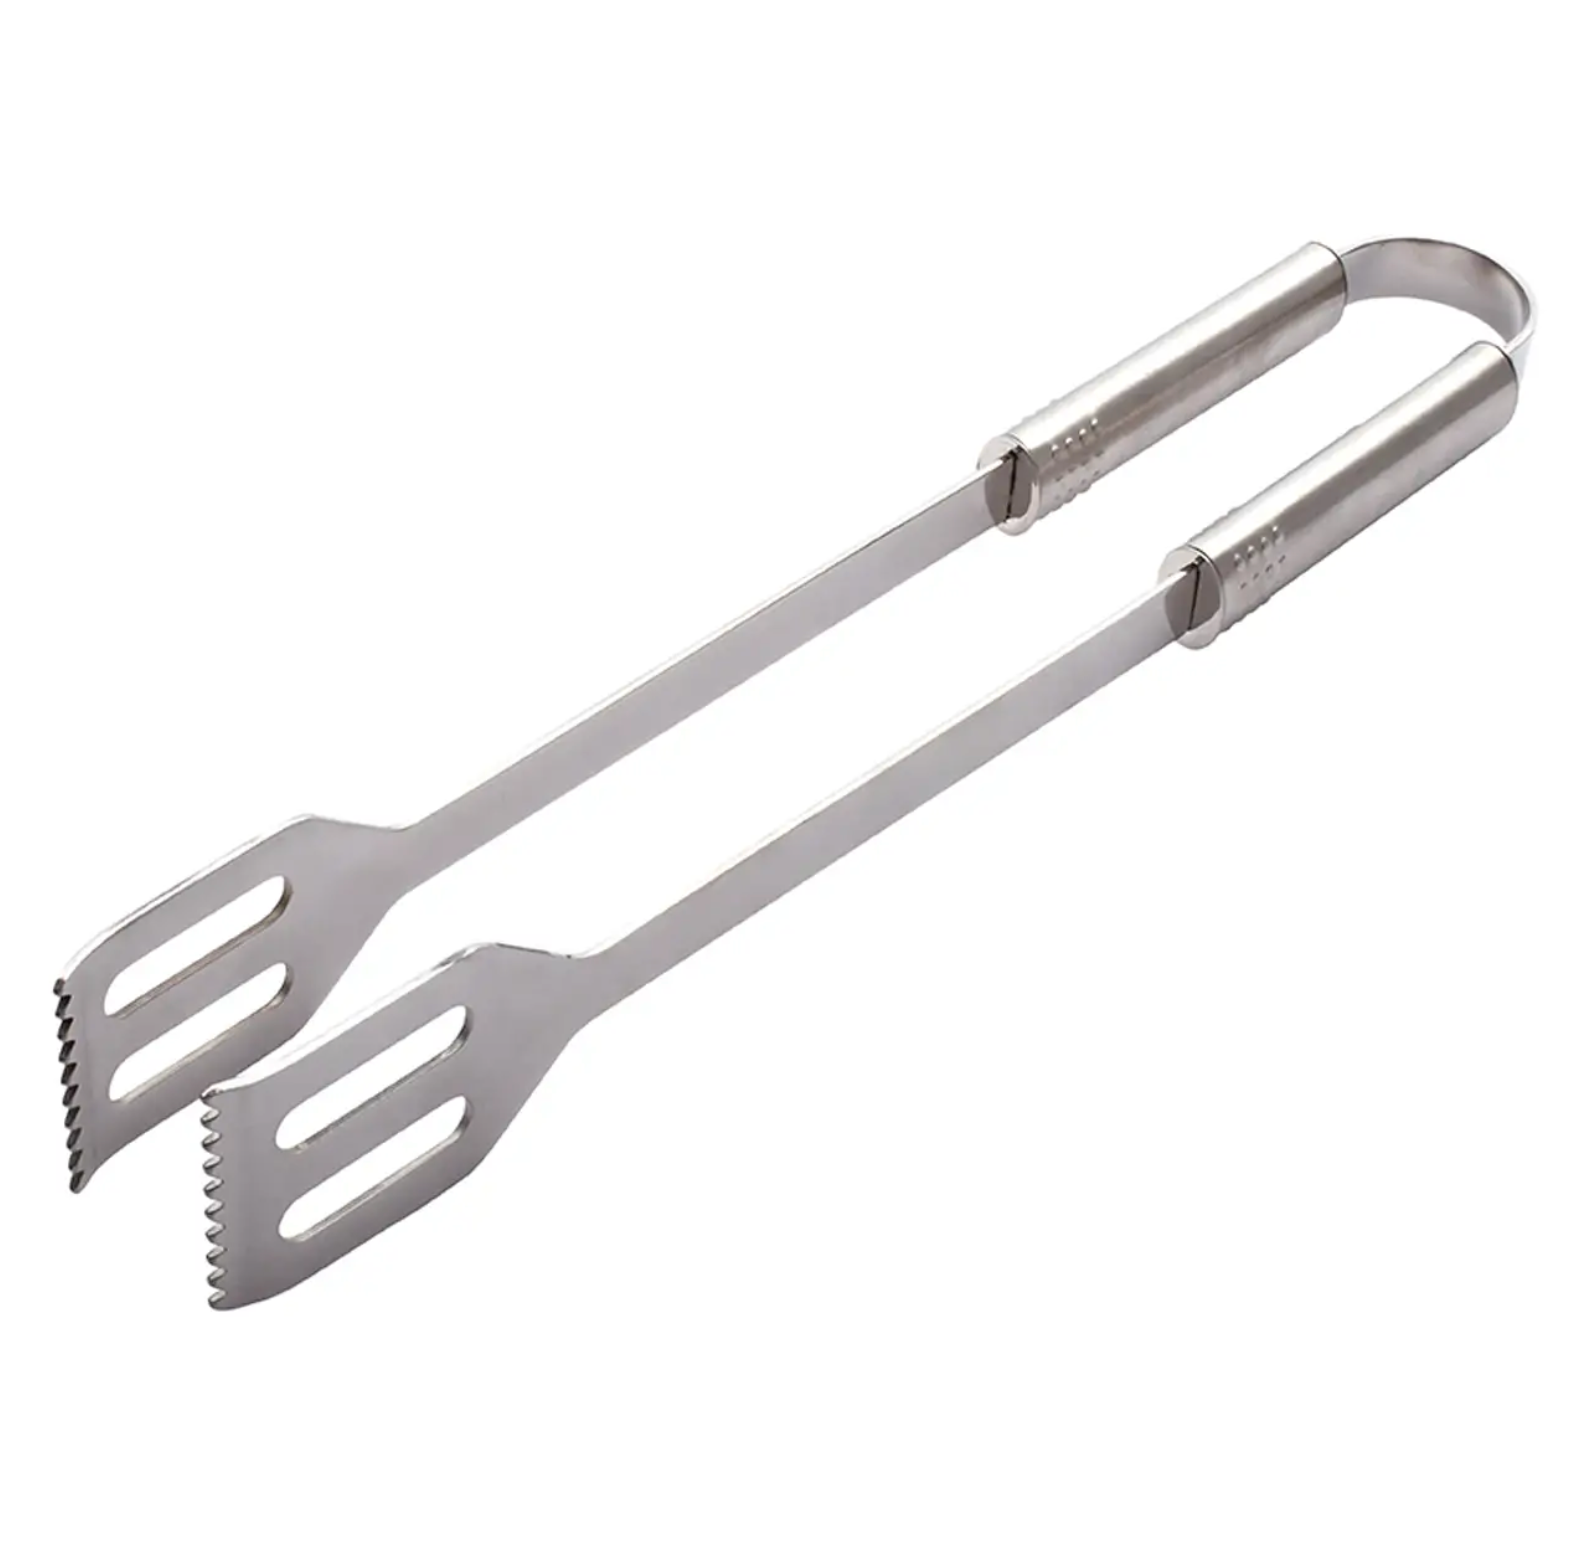 Barbecue Tongs, stainless steel